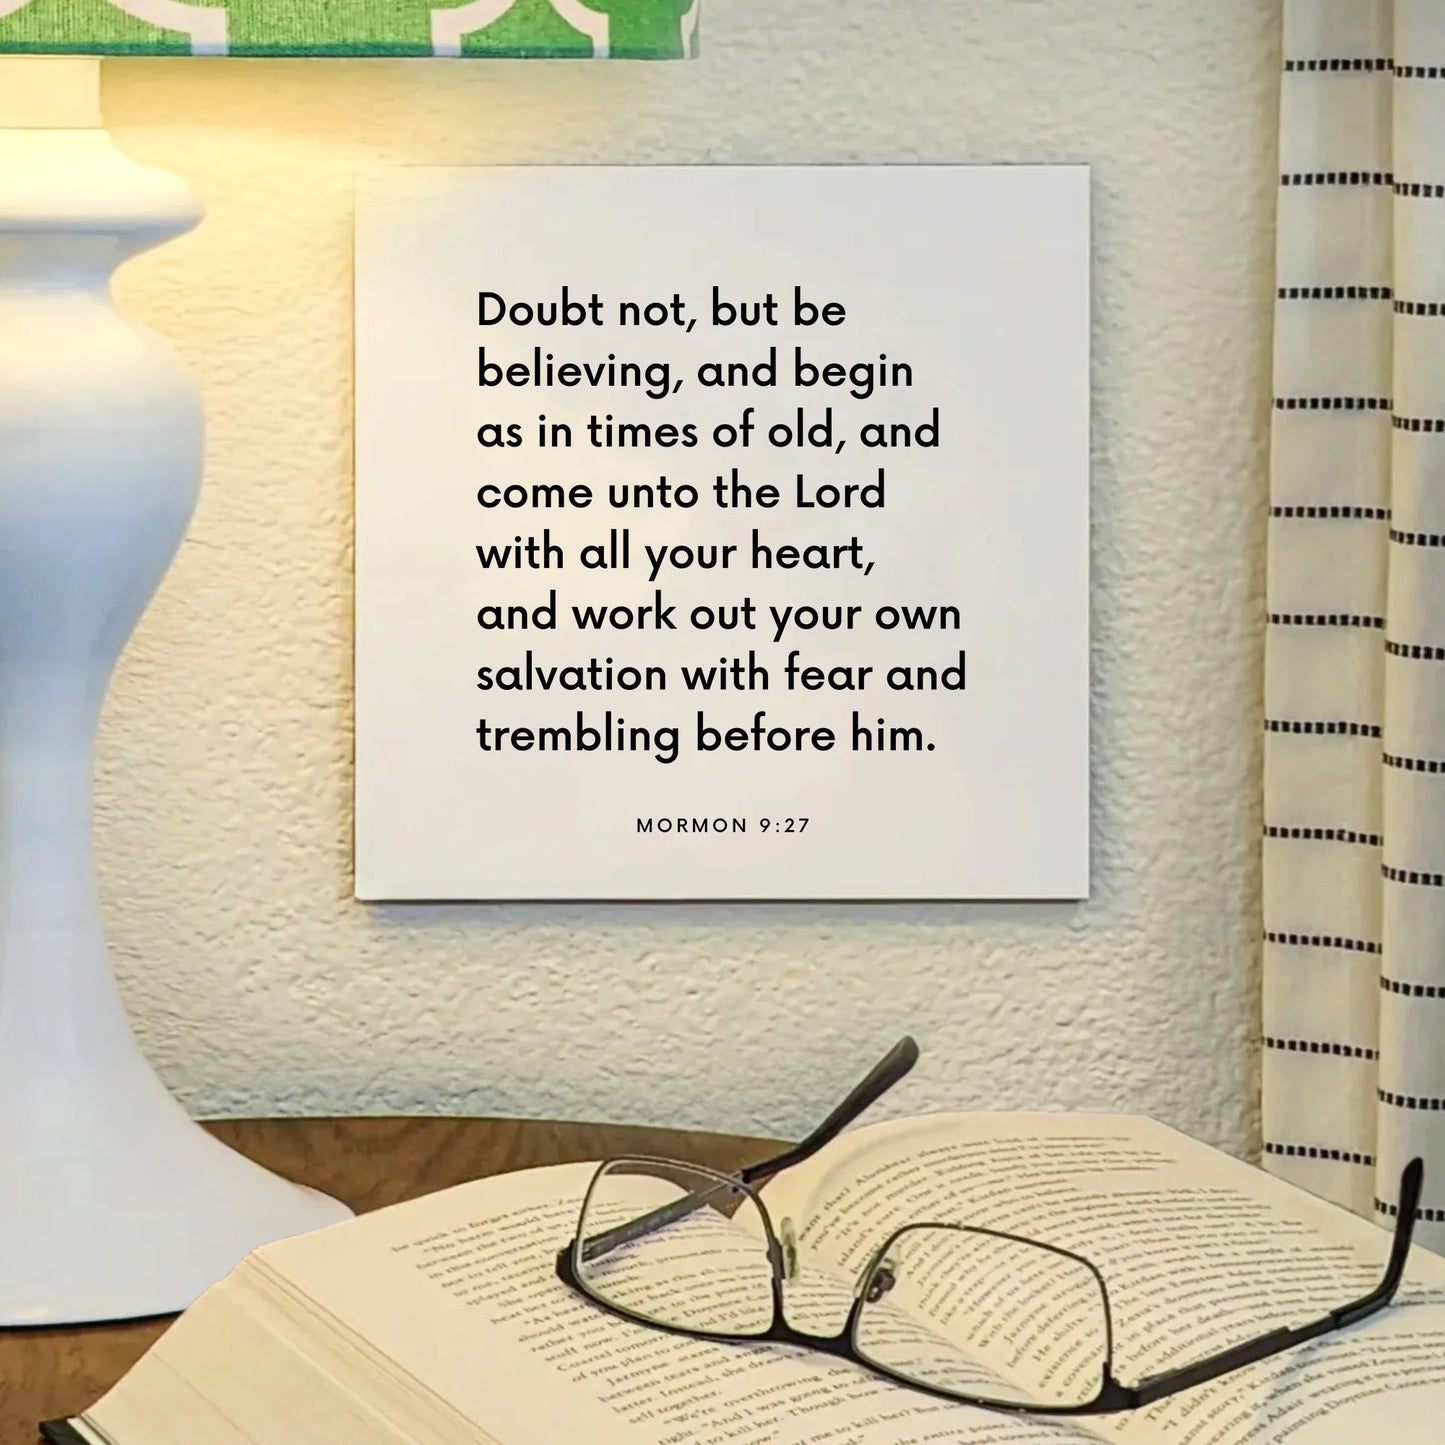 Lamp mouting of the scripture tile for Mormon 9:27 - "Doubt not, but be believing"